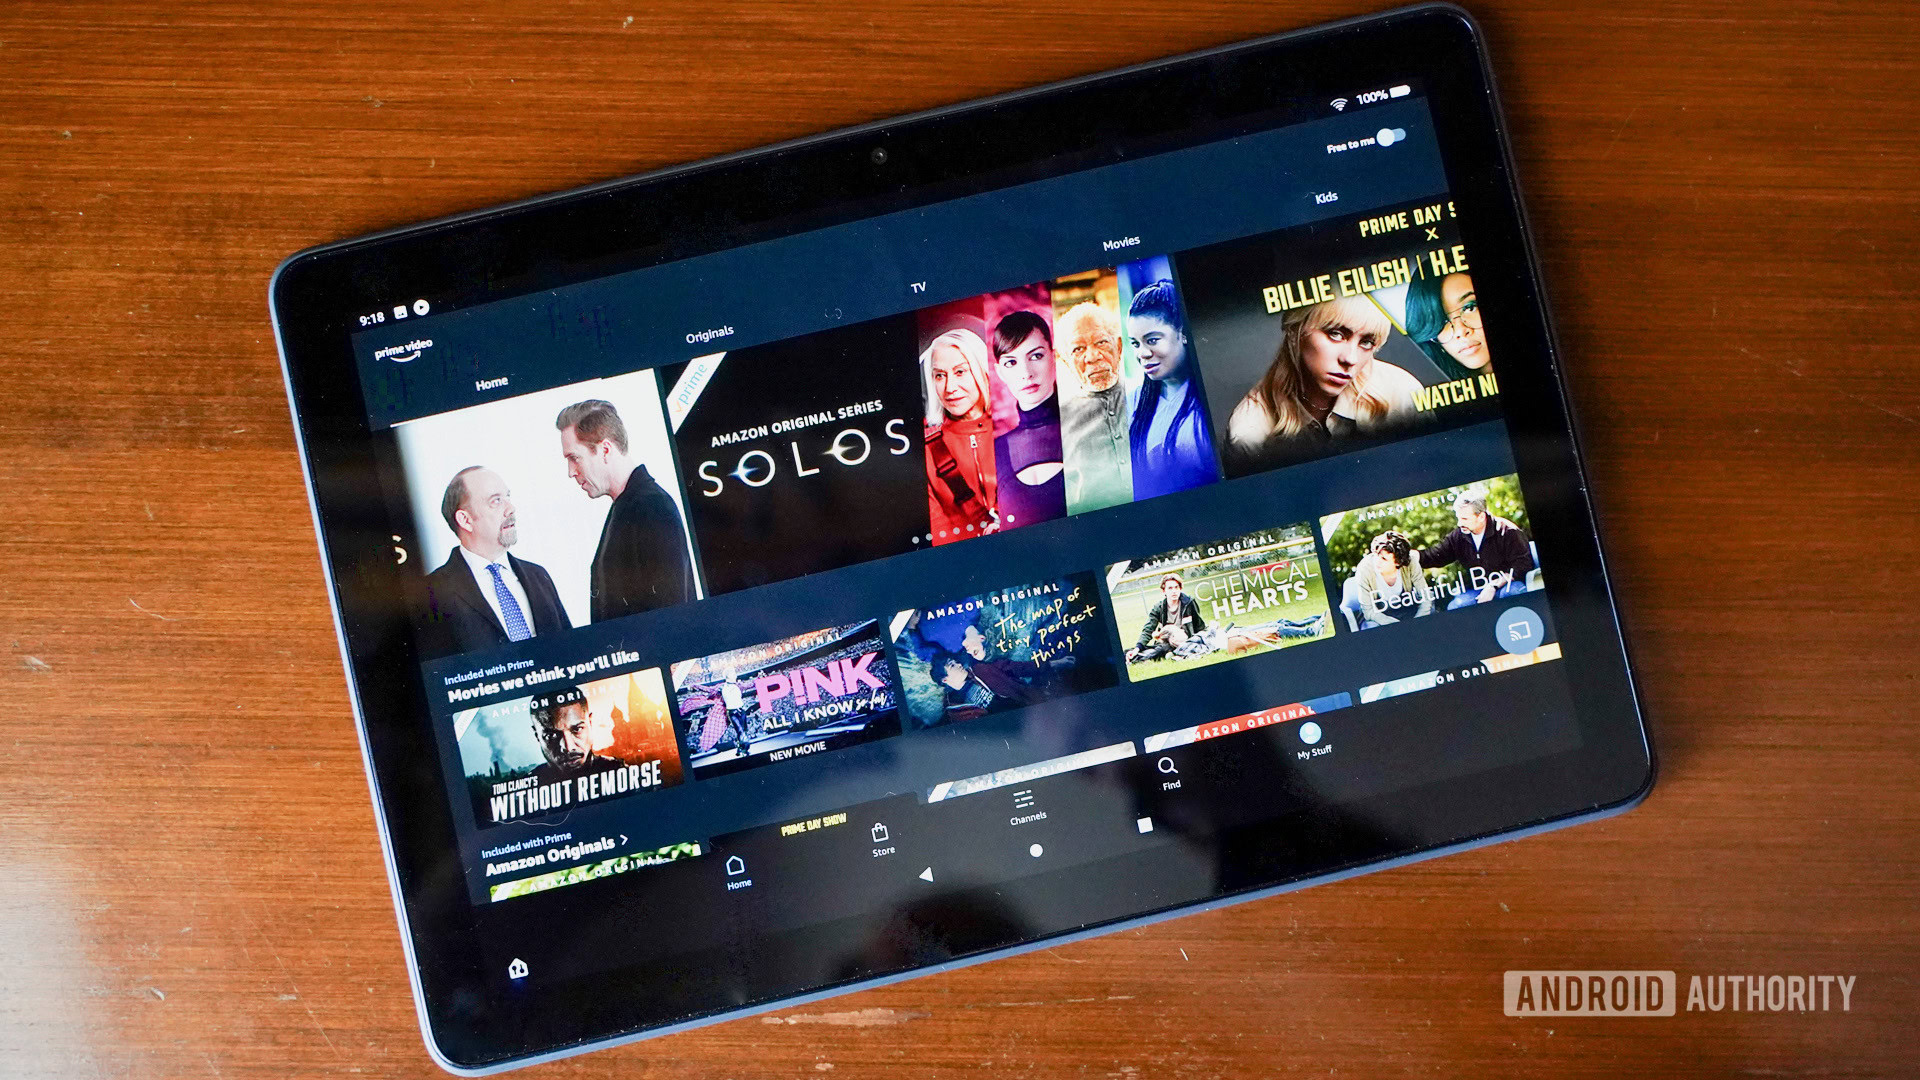 The Amazon Fire HD 10 Plus showing available titles on Amazon Prime Video.